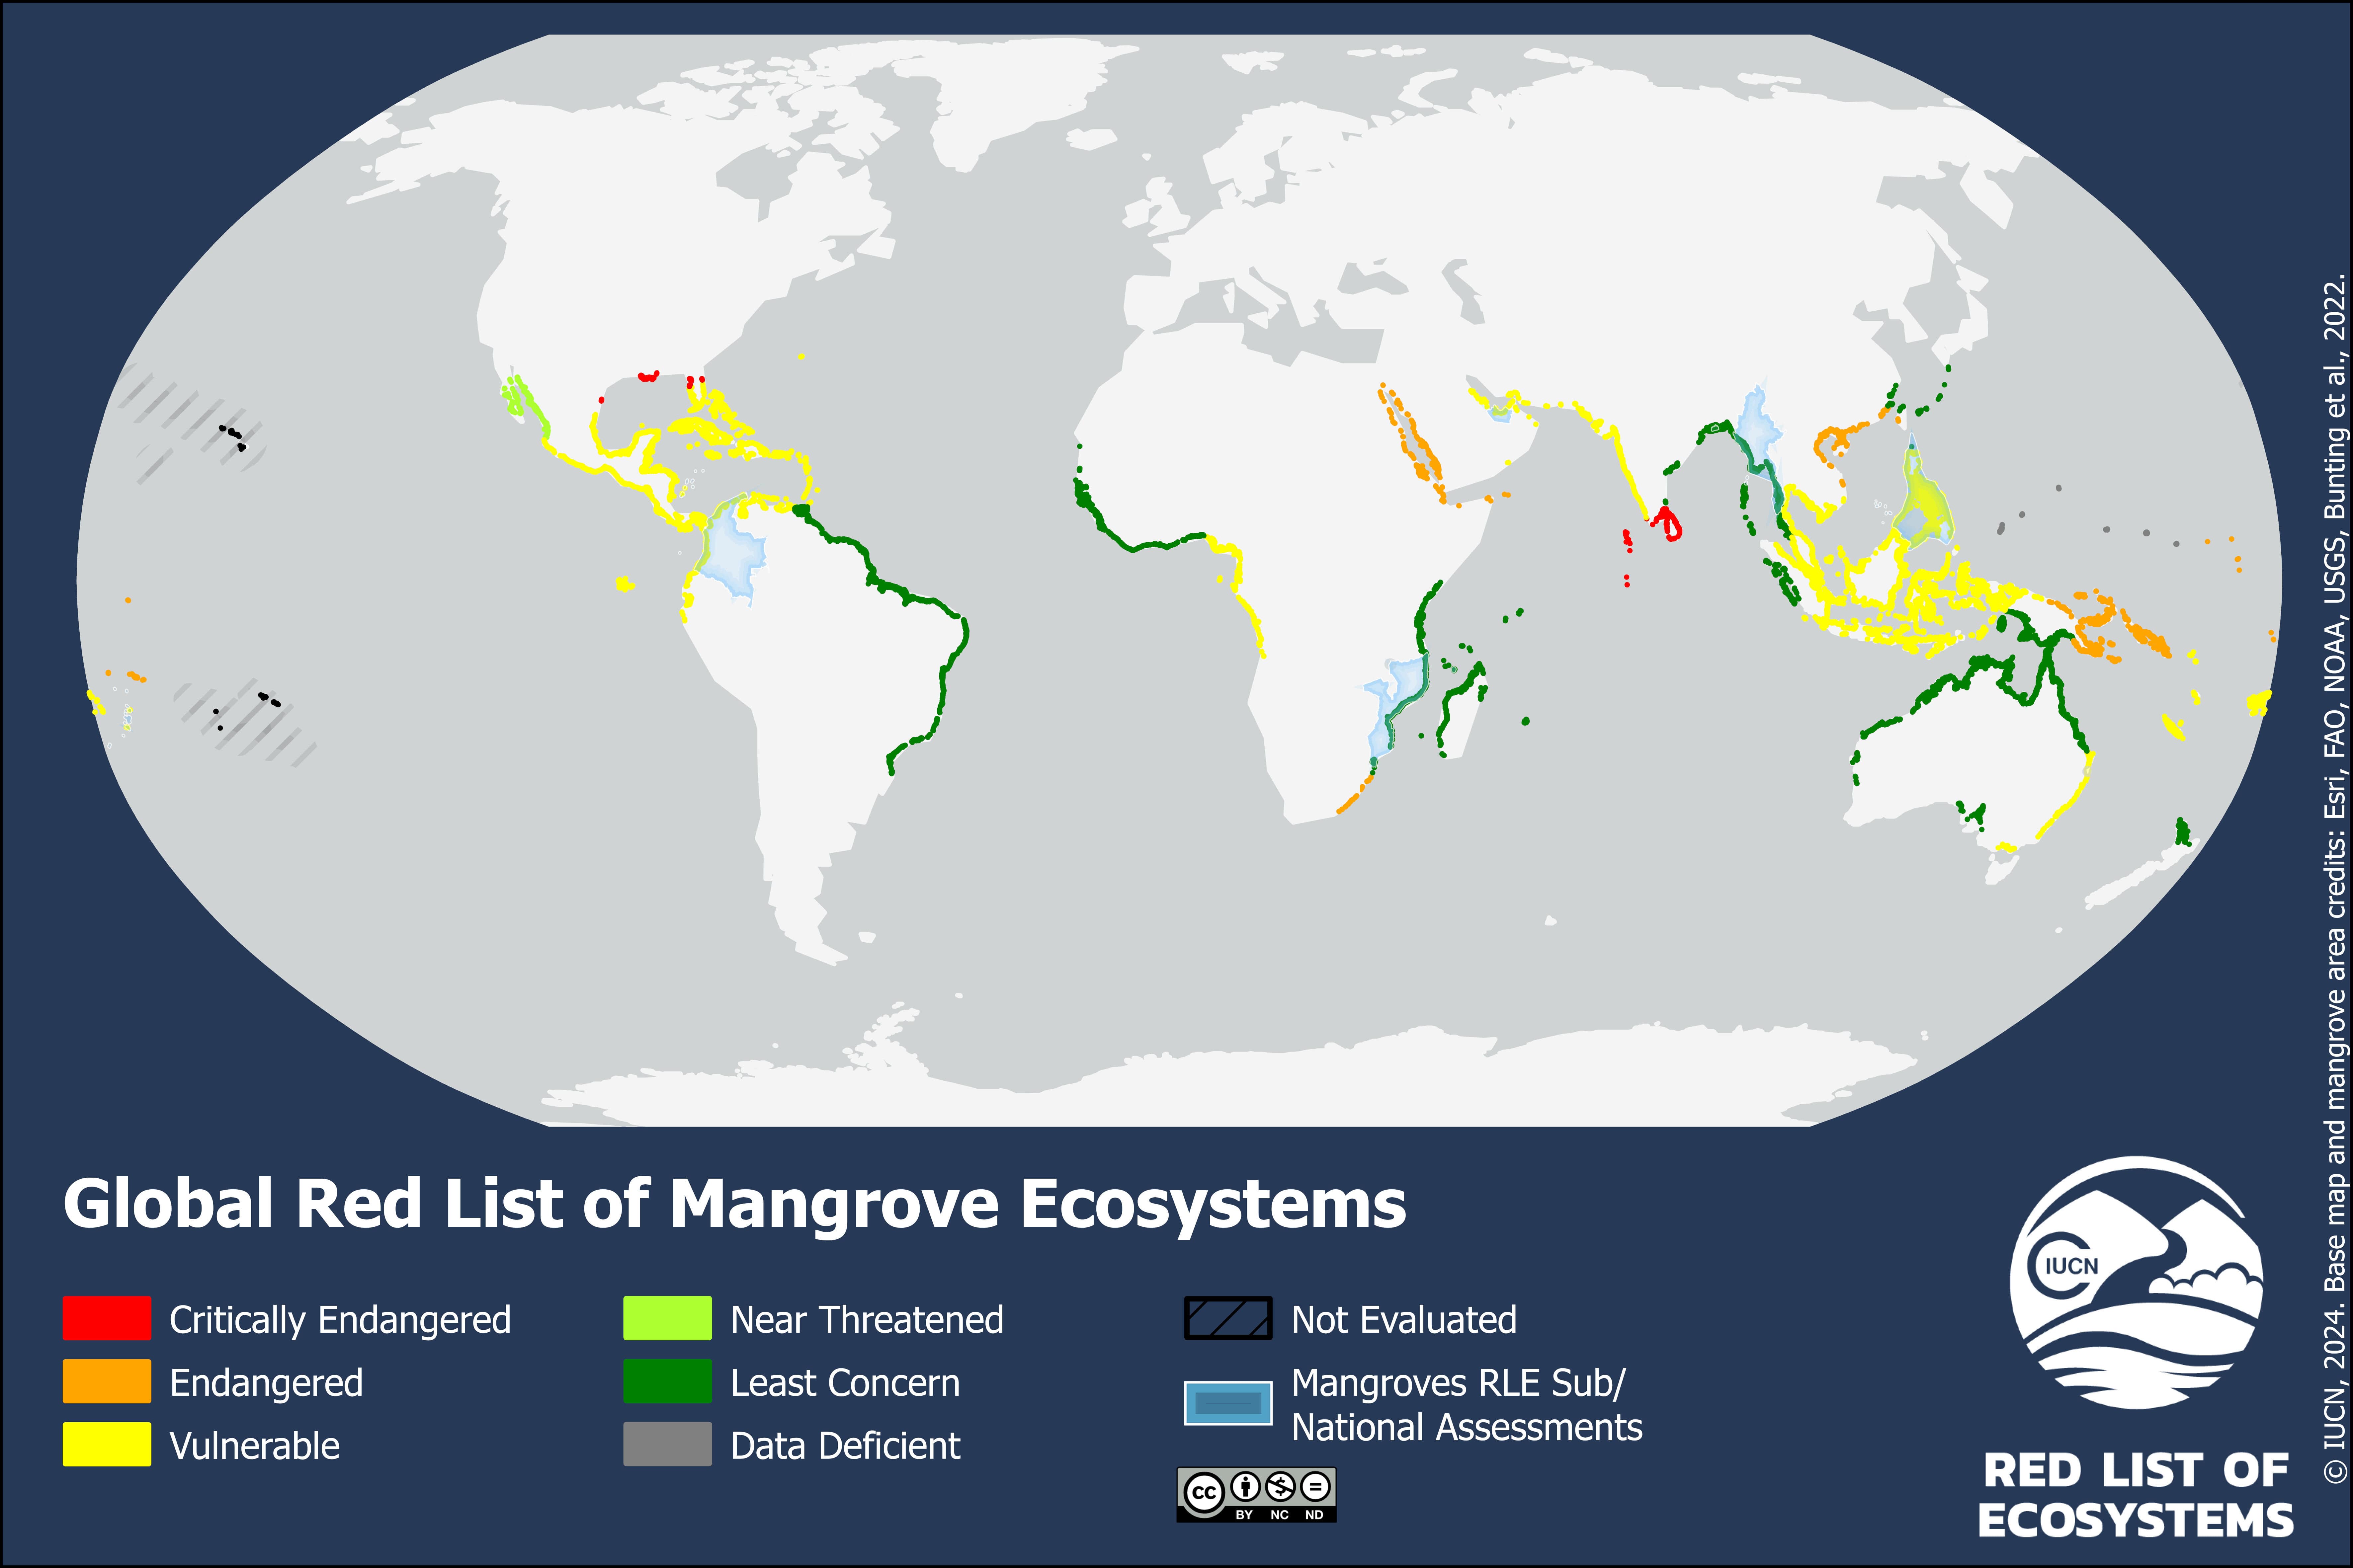 The global mangrove areas are depicted above 